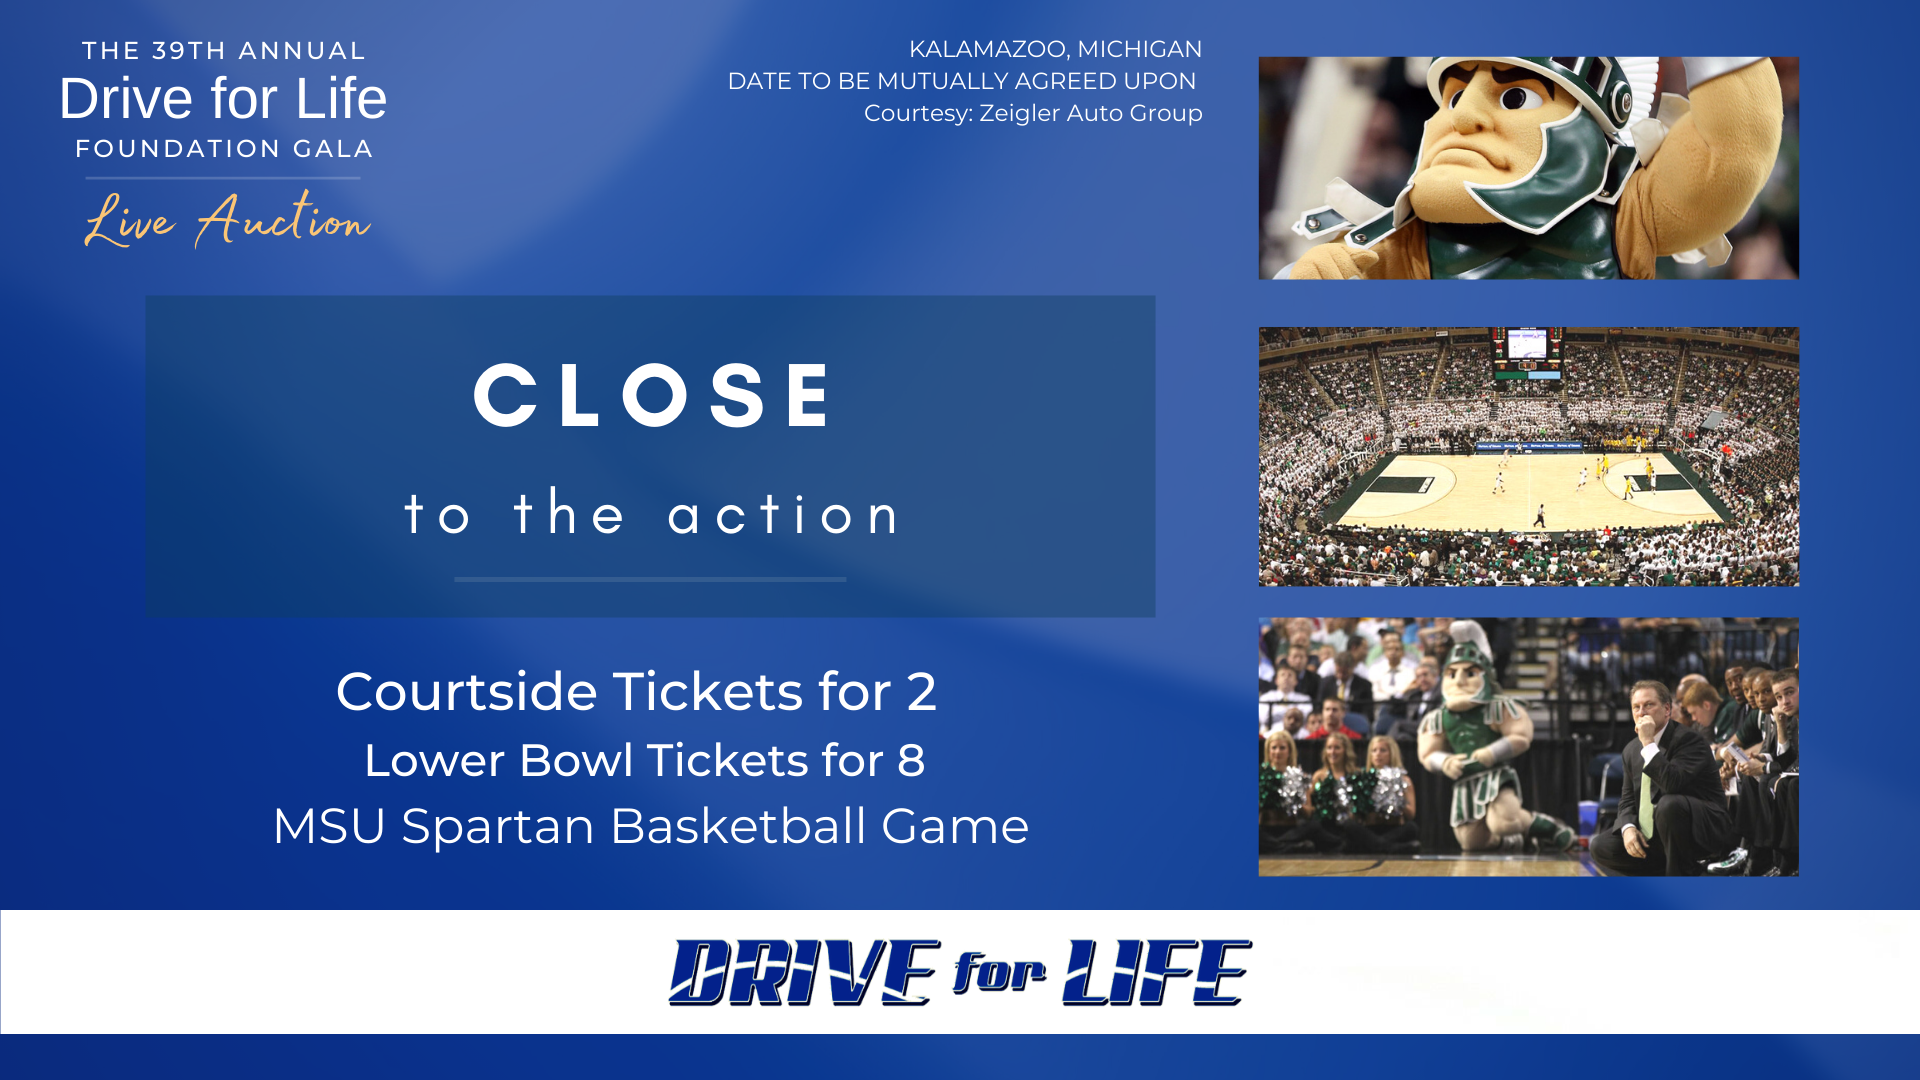 LIVE AUCTION EXPERIENCE: Close to the Action - Available at the 39th Annual Drive for Life Foundation Monday, September 13, 2021 at 6:30 p.m. at the Radisson Plaza Hotel in Kalamazoo, Mich.